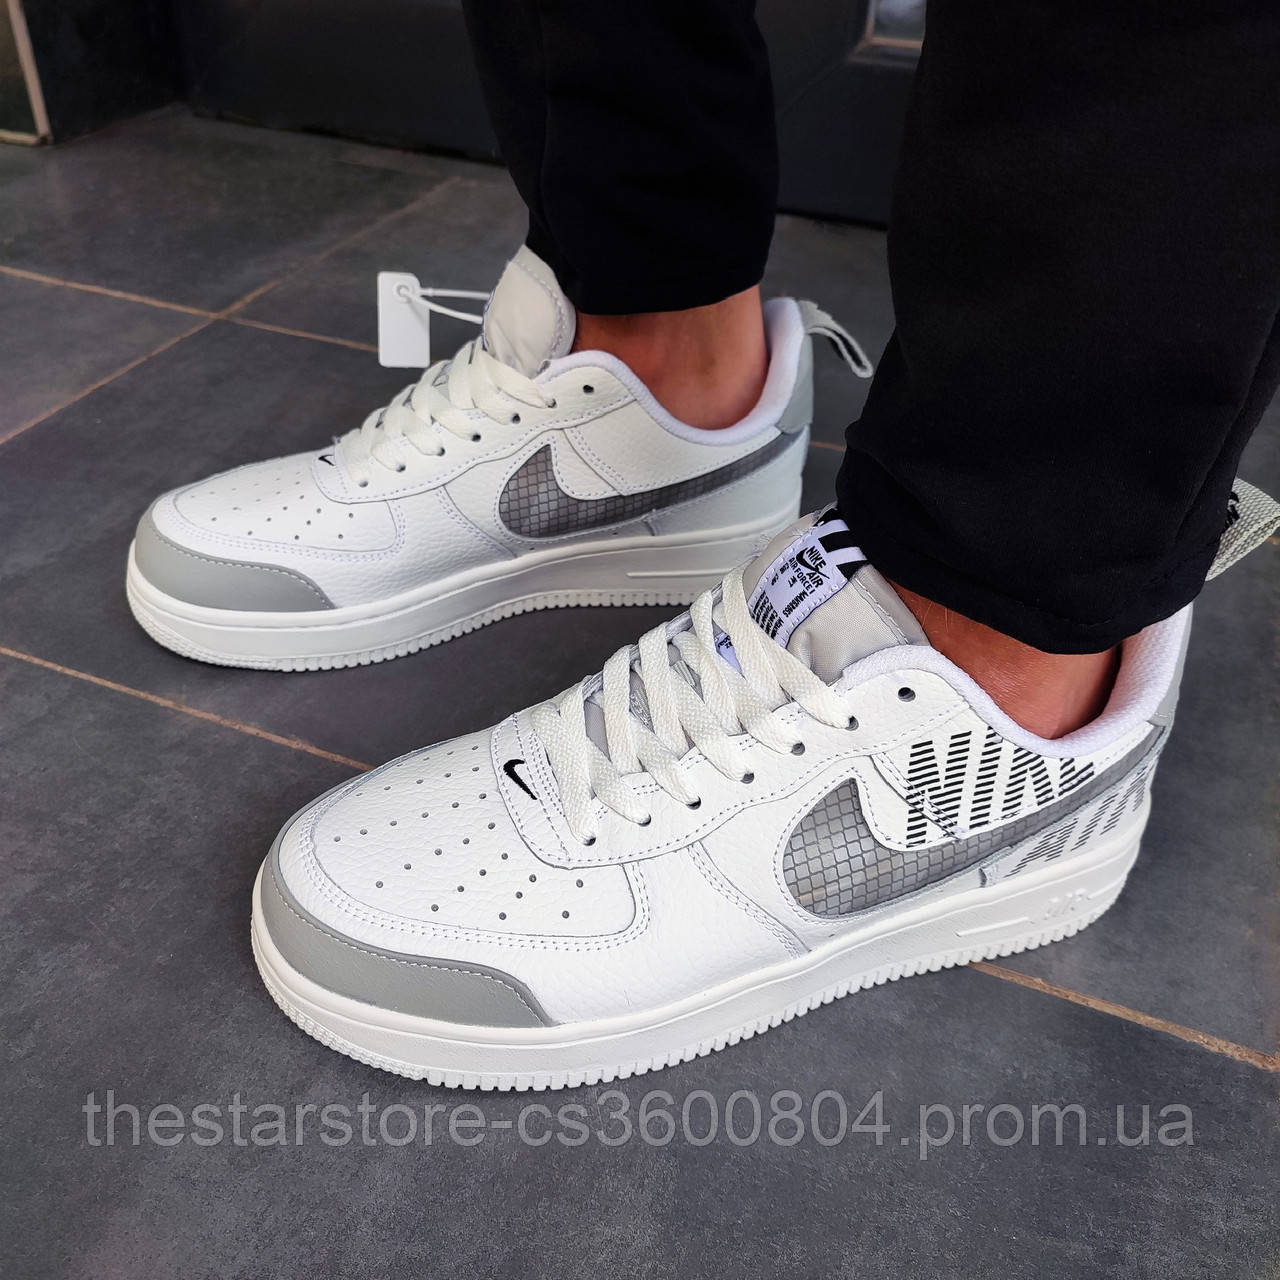 Nike Air Force 1 Low LV8 2 White/Grey 